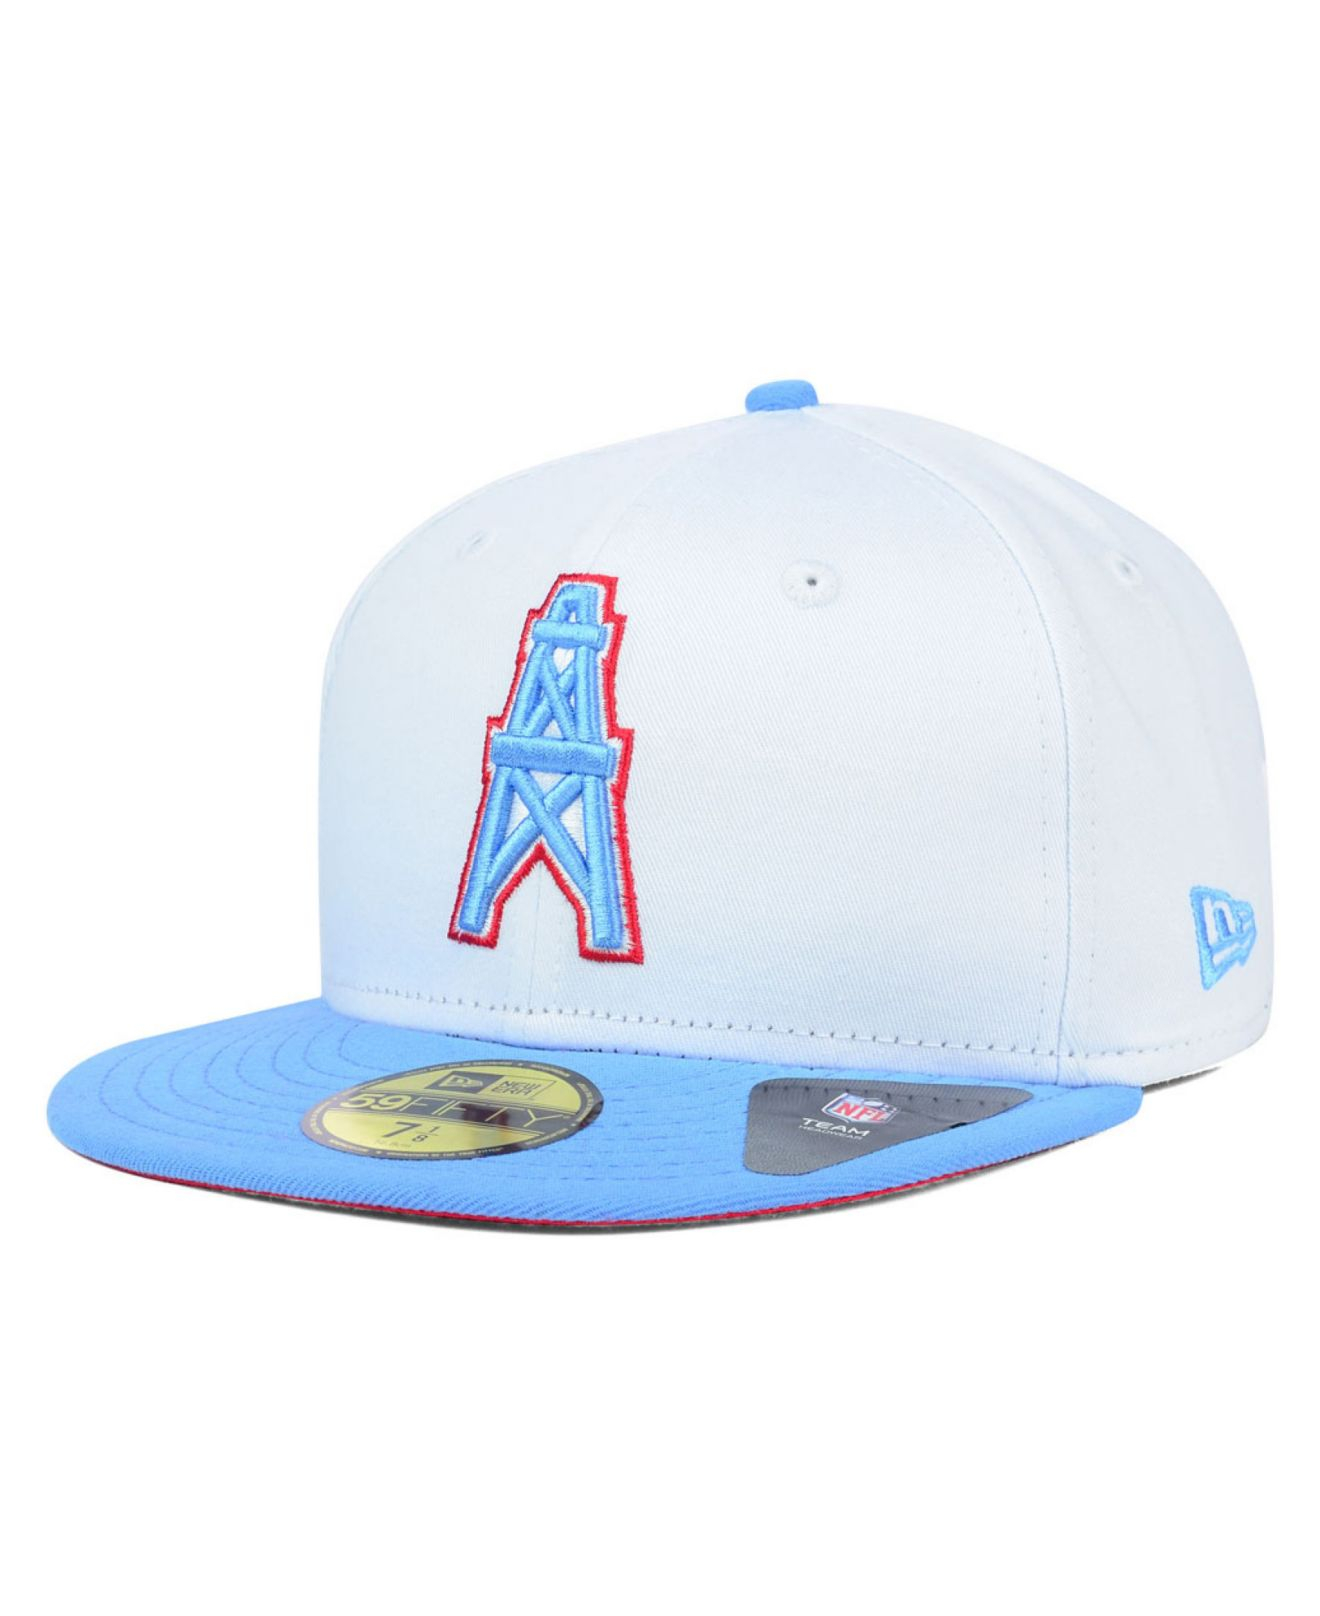 HOUSTON OILERS 59FIFTY FITTED HAT 70716031 lupon.gov.ph